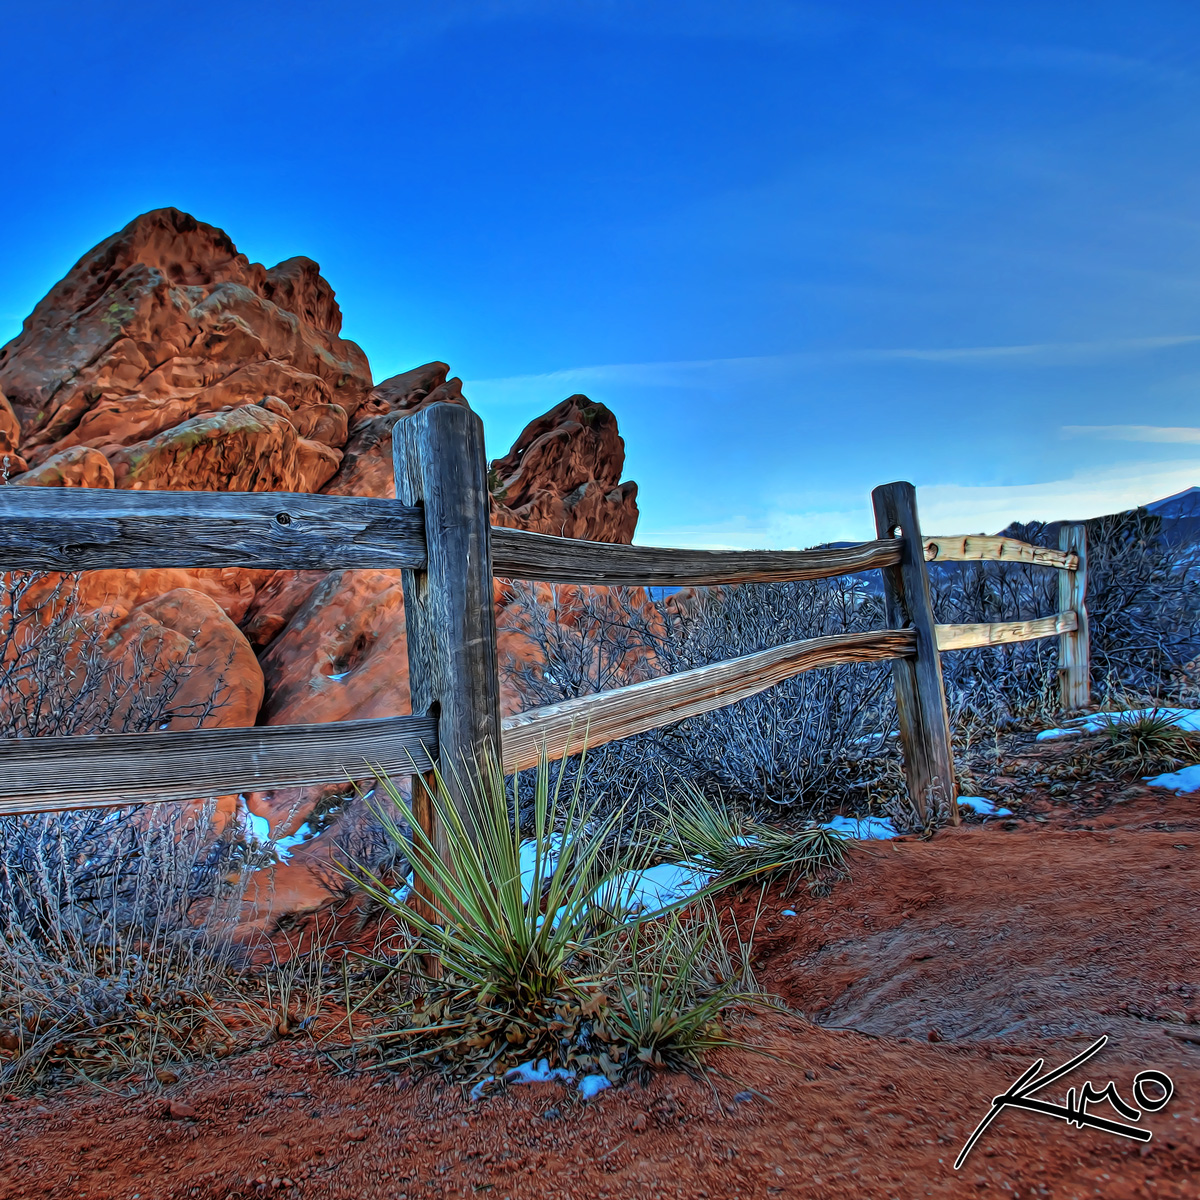 The Fence at Garden of Gods